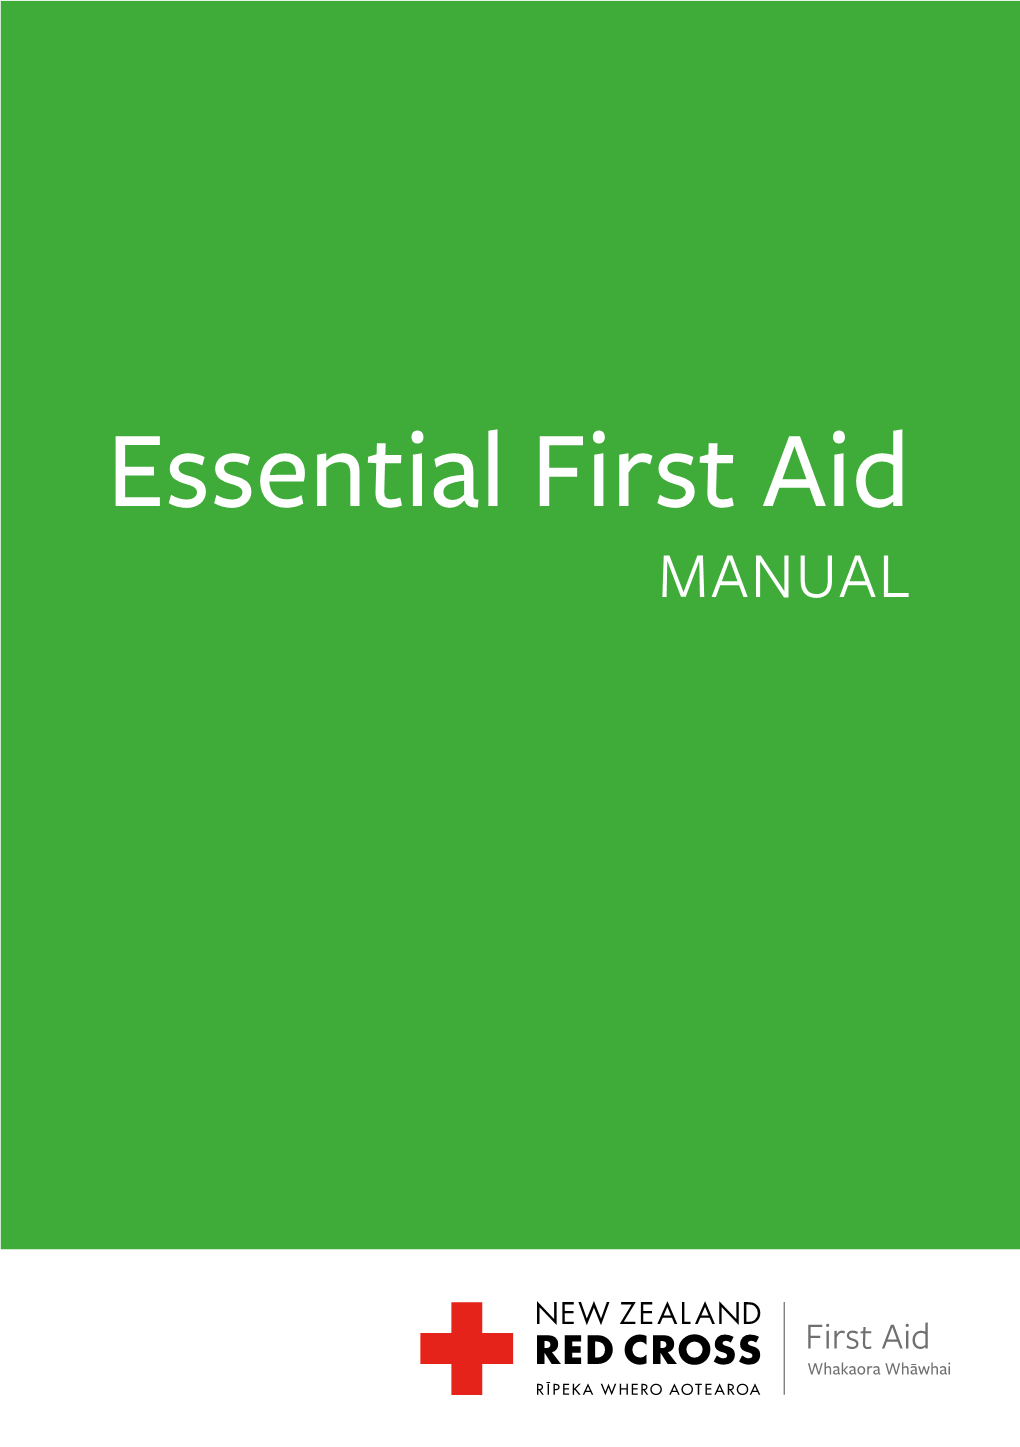 Essential First Aid MANUAL New Zealand Red Cross Now Carries the Most Comprehensive Range of First Aid Kits in New Zealand